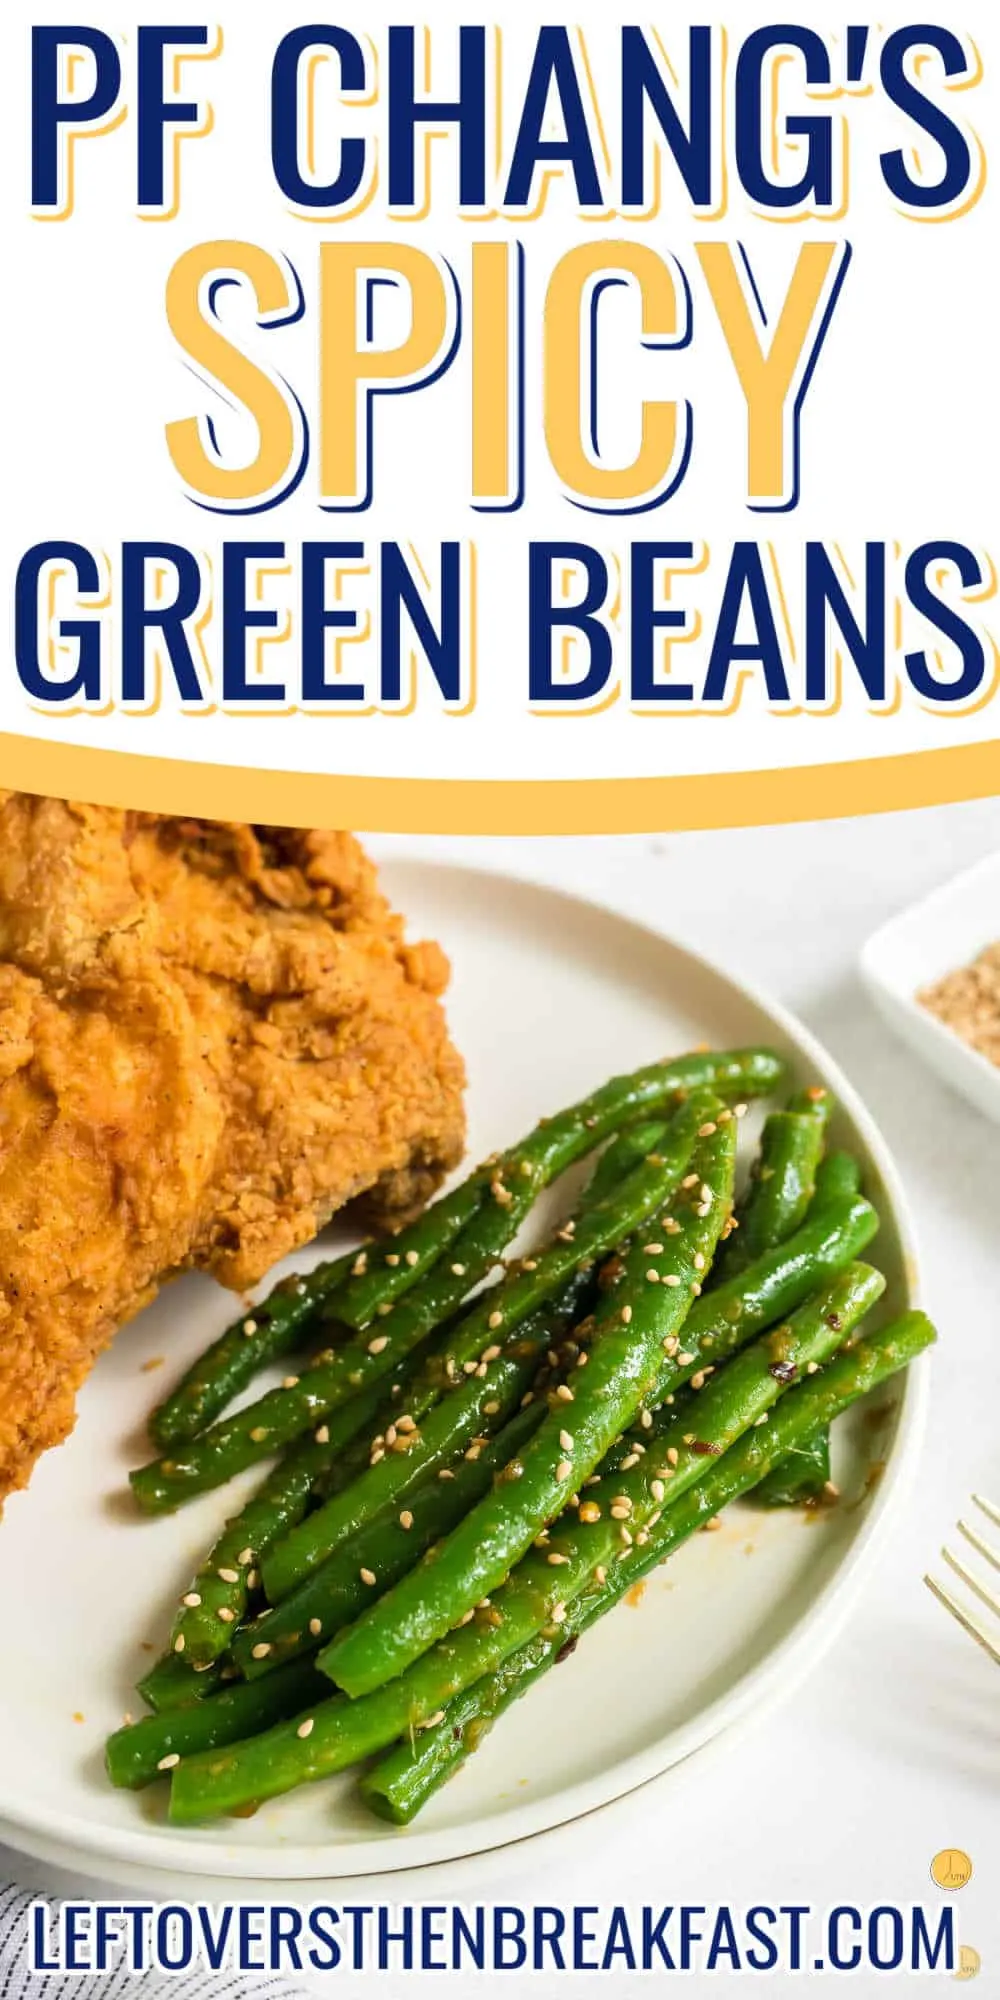 Close-up of an oval plate with fried chicken on one side and spicy green beans on the other side. There is a text box on the top saying "Spicy Green Beans".